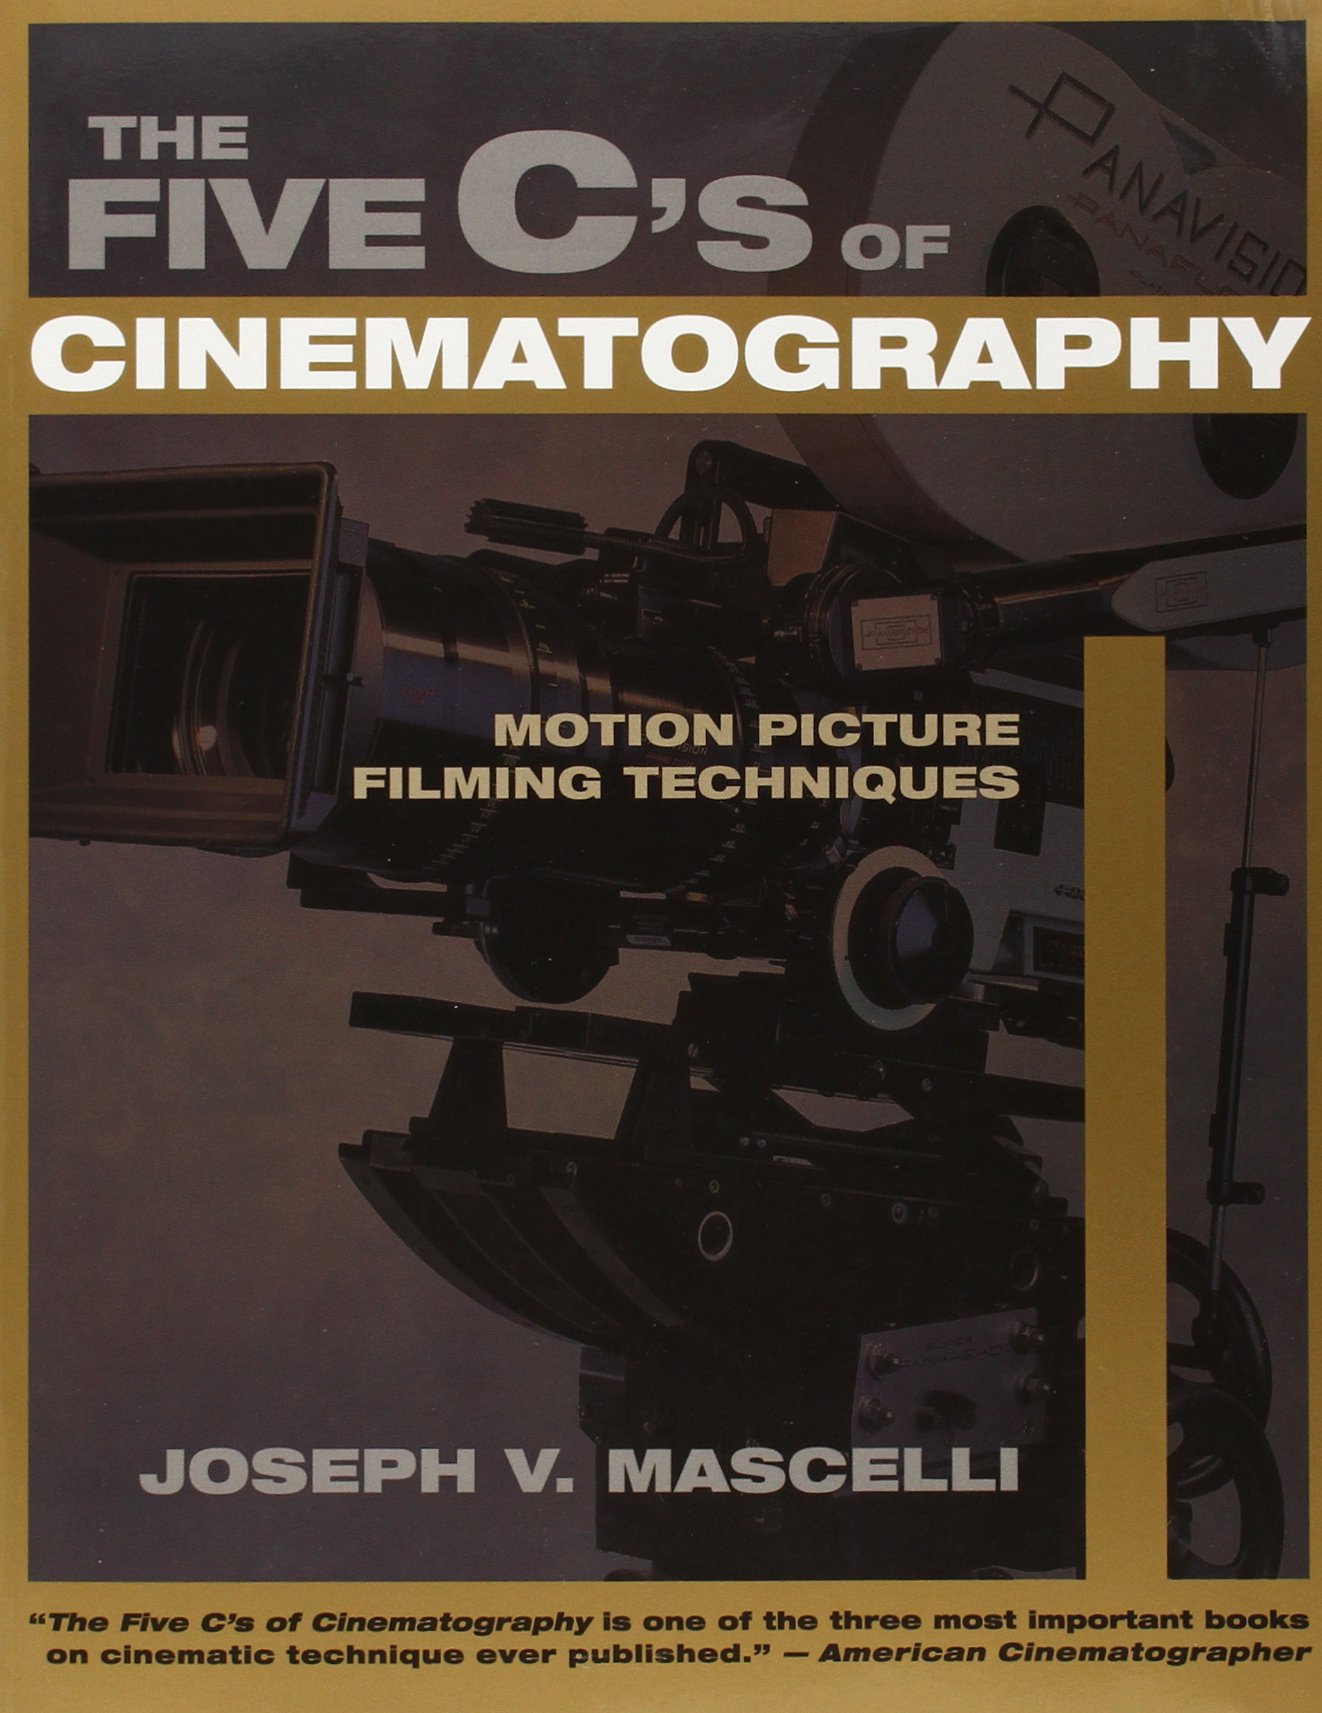 The Five C's of Cinematography: Motion Picture Filming Techniques Simplified